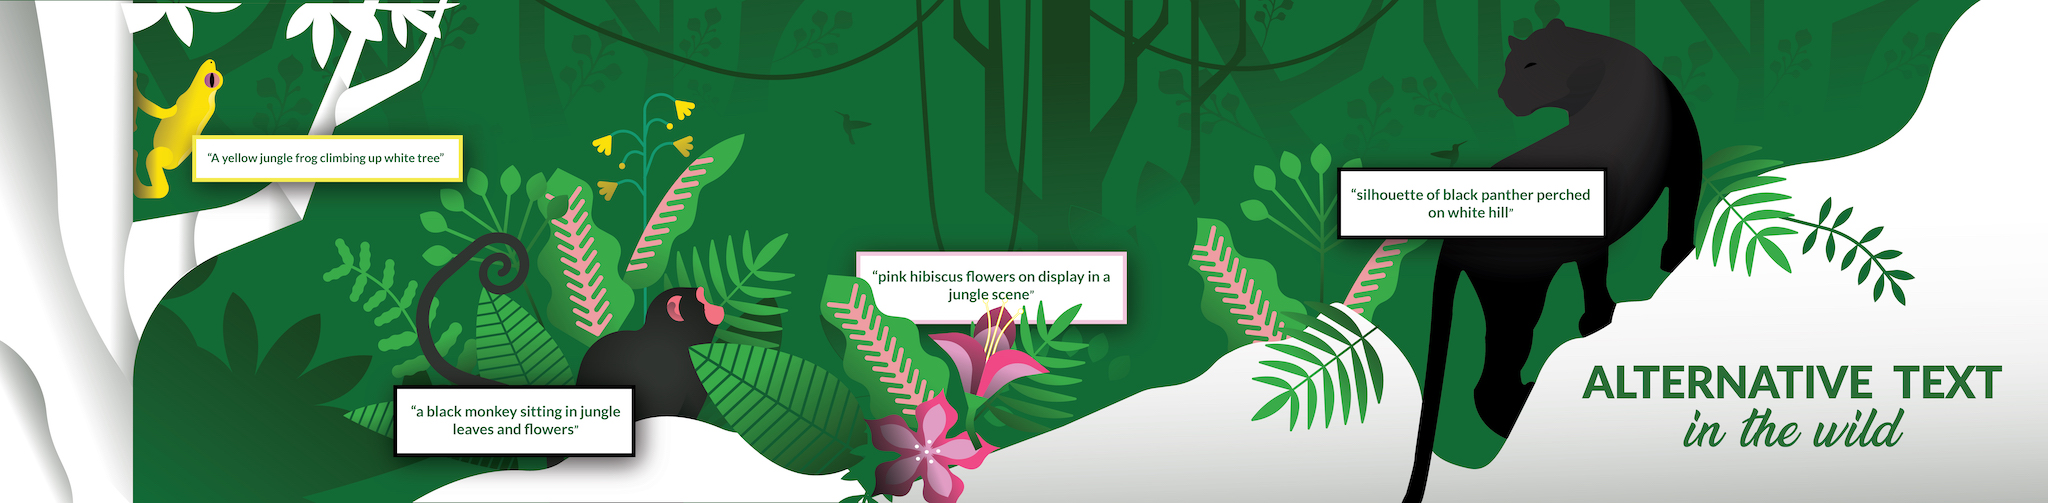 Illustrated jungle scene with a frog, monkey, flowers, and panther. Each animal has an alternative text blurb describing it.